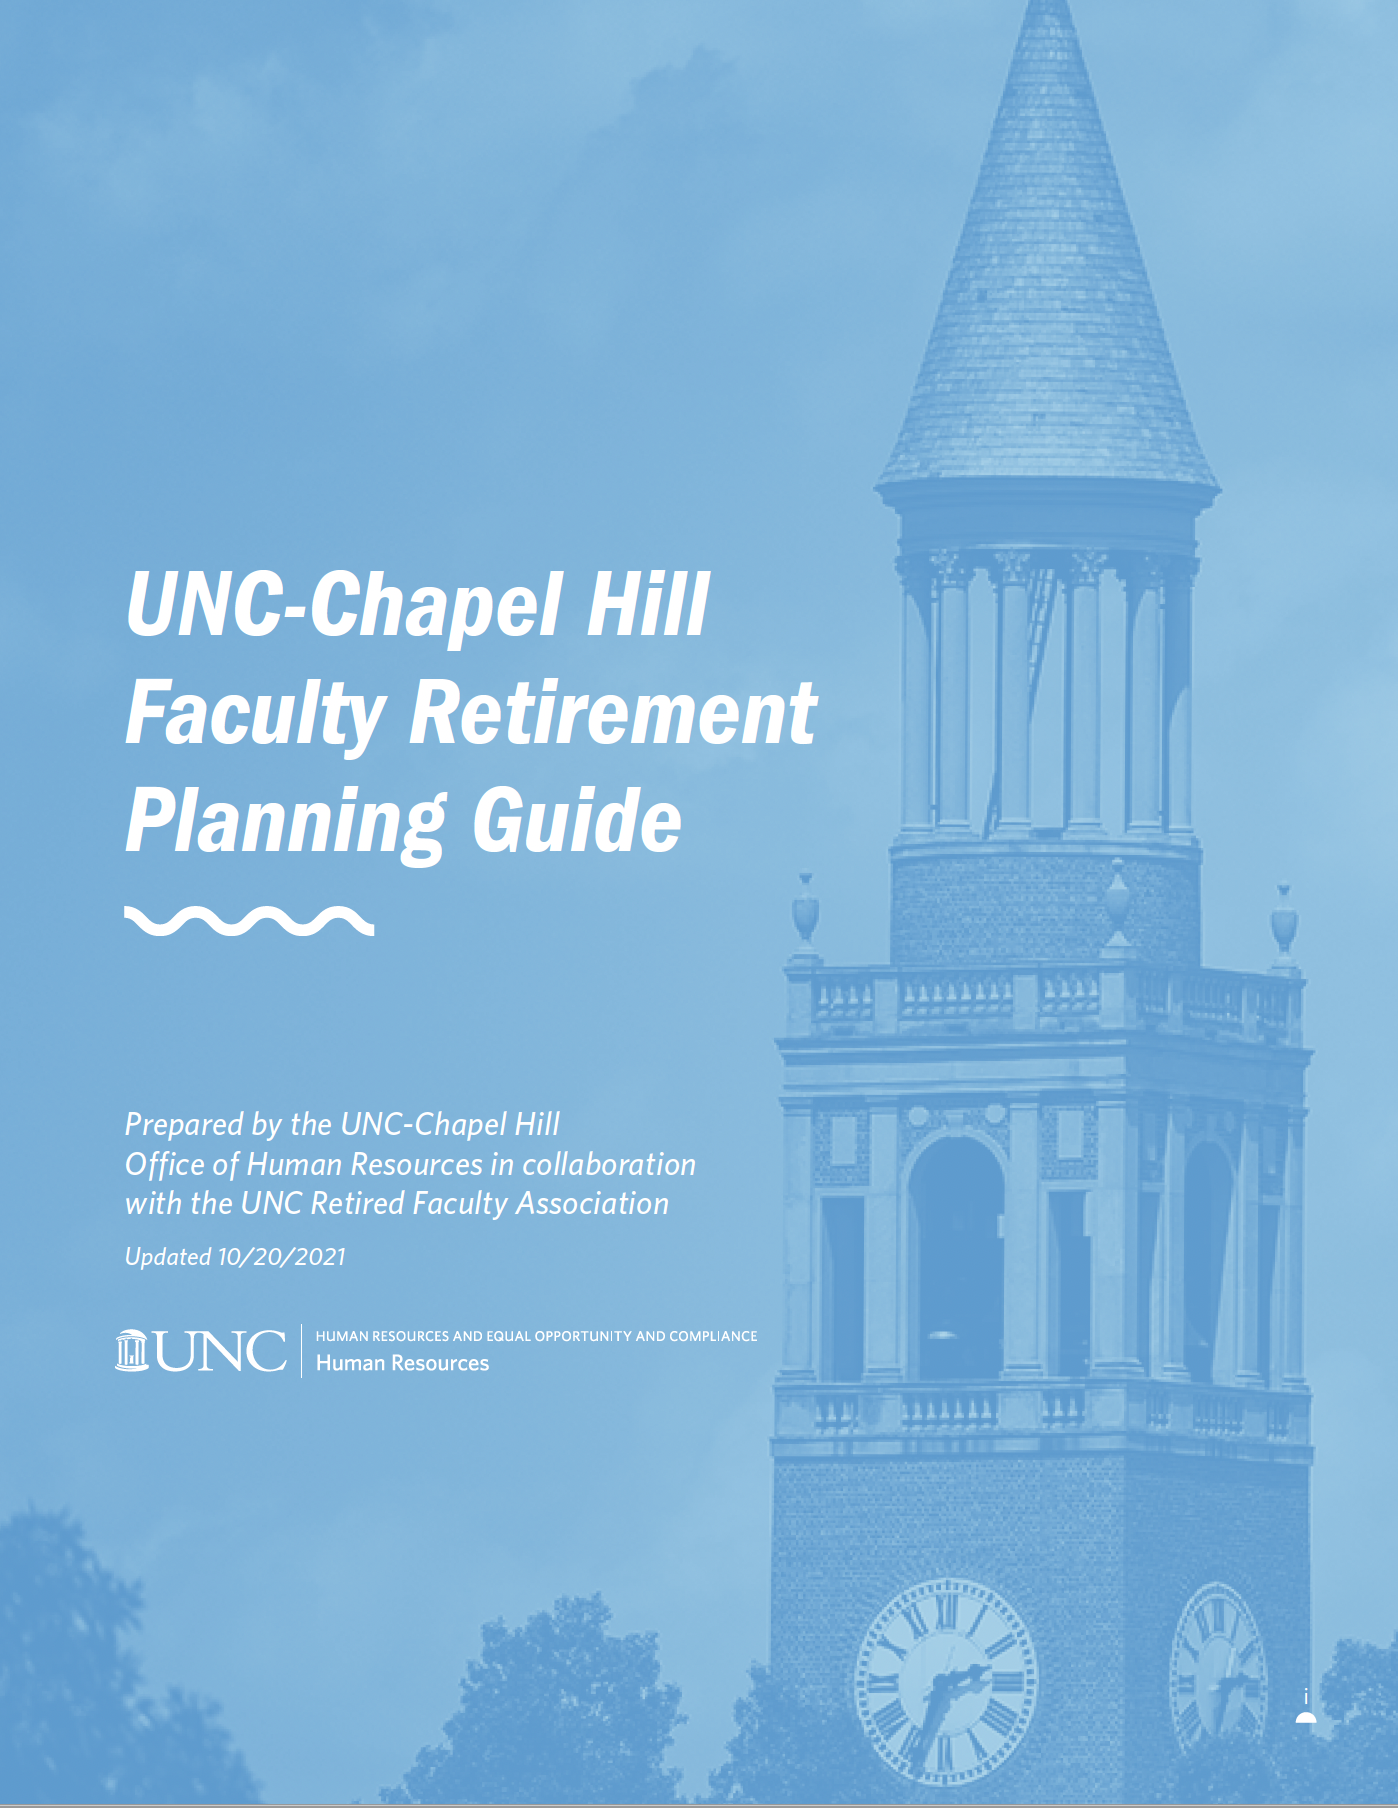 Graphic reading "UNC-Chapel Hill Faculty Retirement Planning Guide"